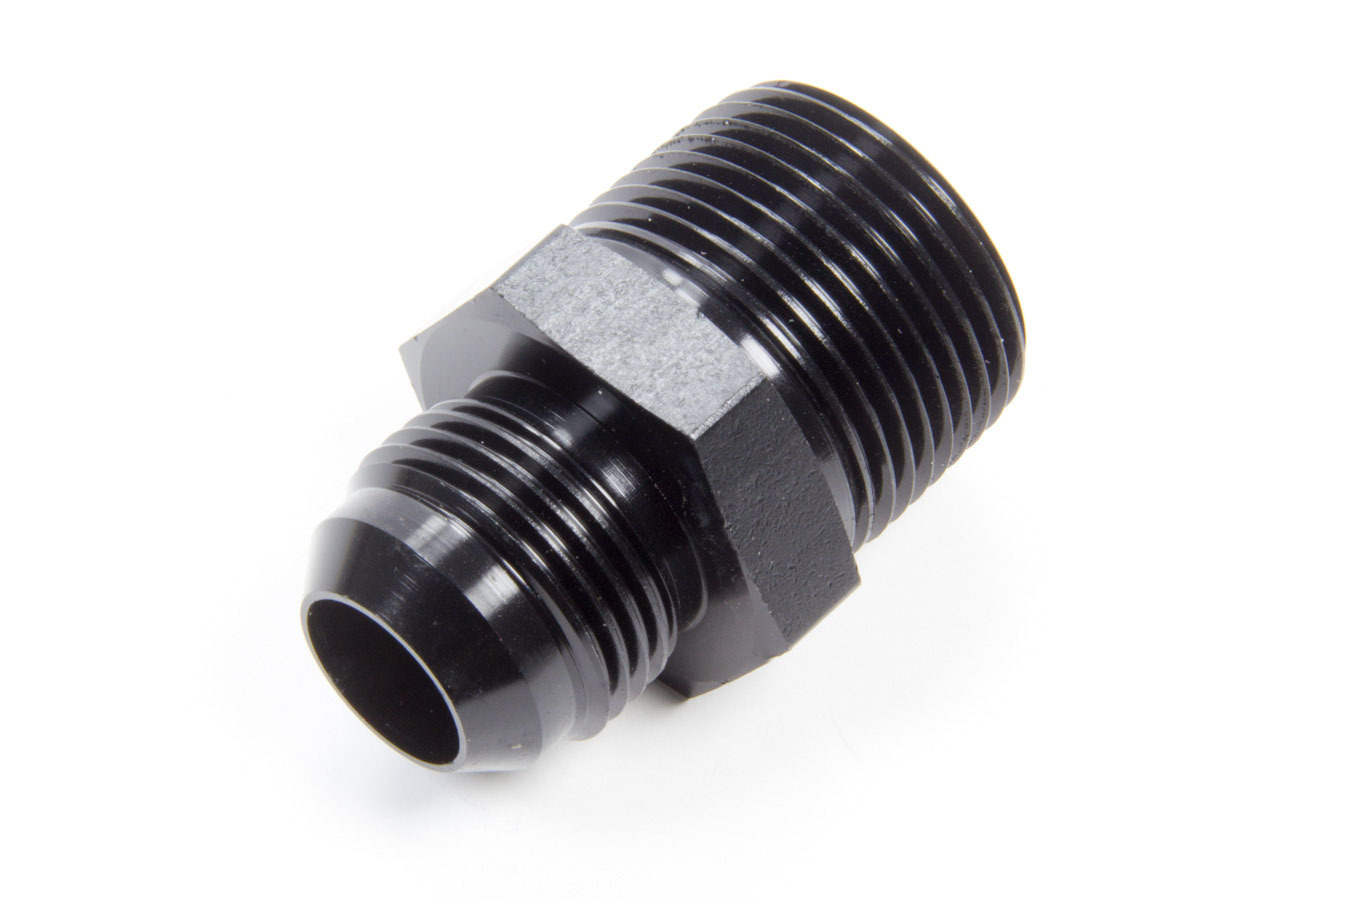 Aeroquip FCM5014 Fitting, Adapter, Straight, 12 AN Male to 1 in NPT Male, Aluminum, Black Anodized, Each